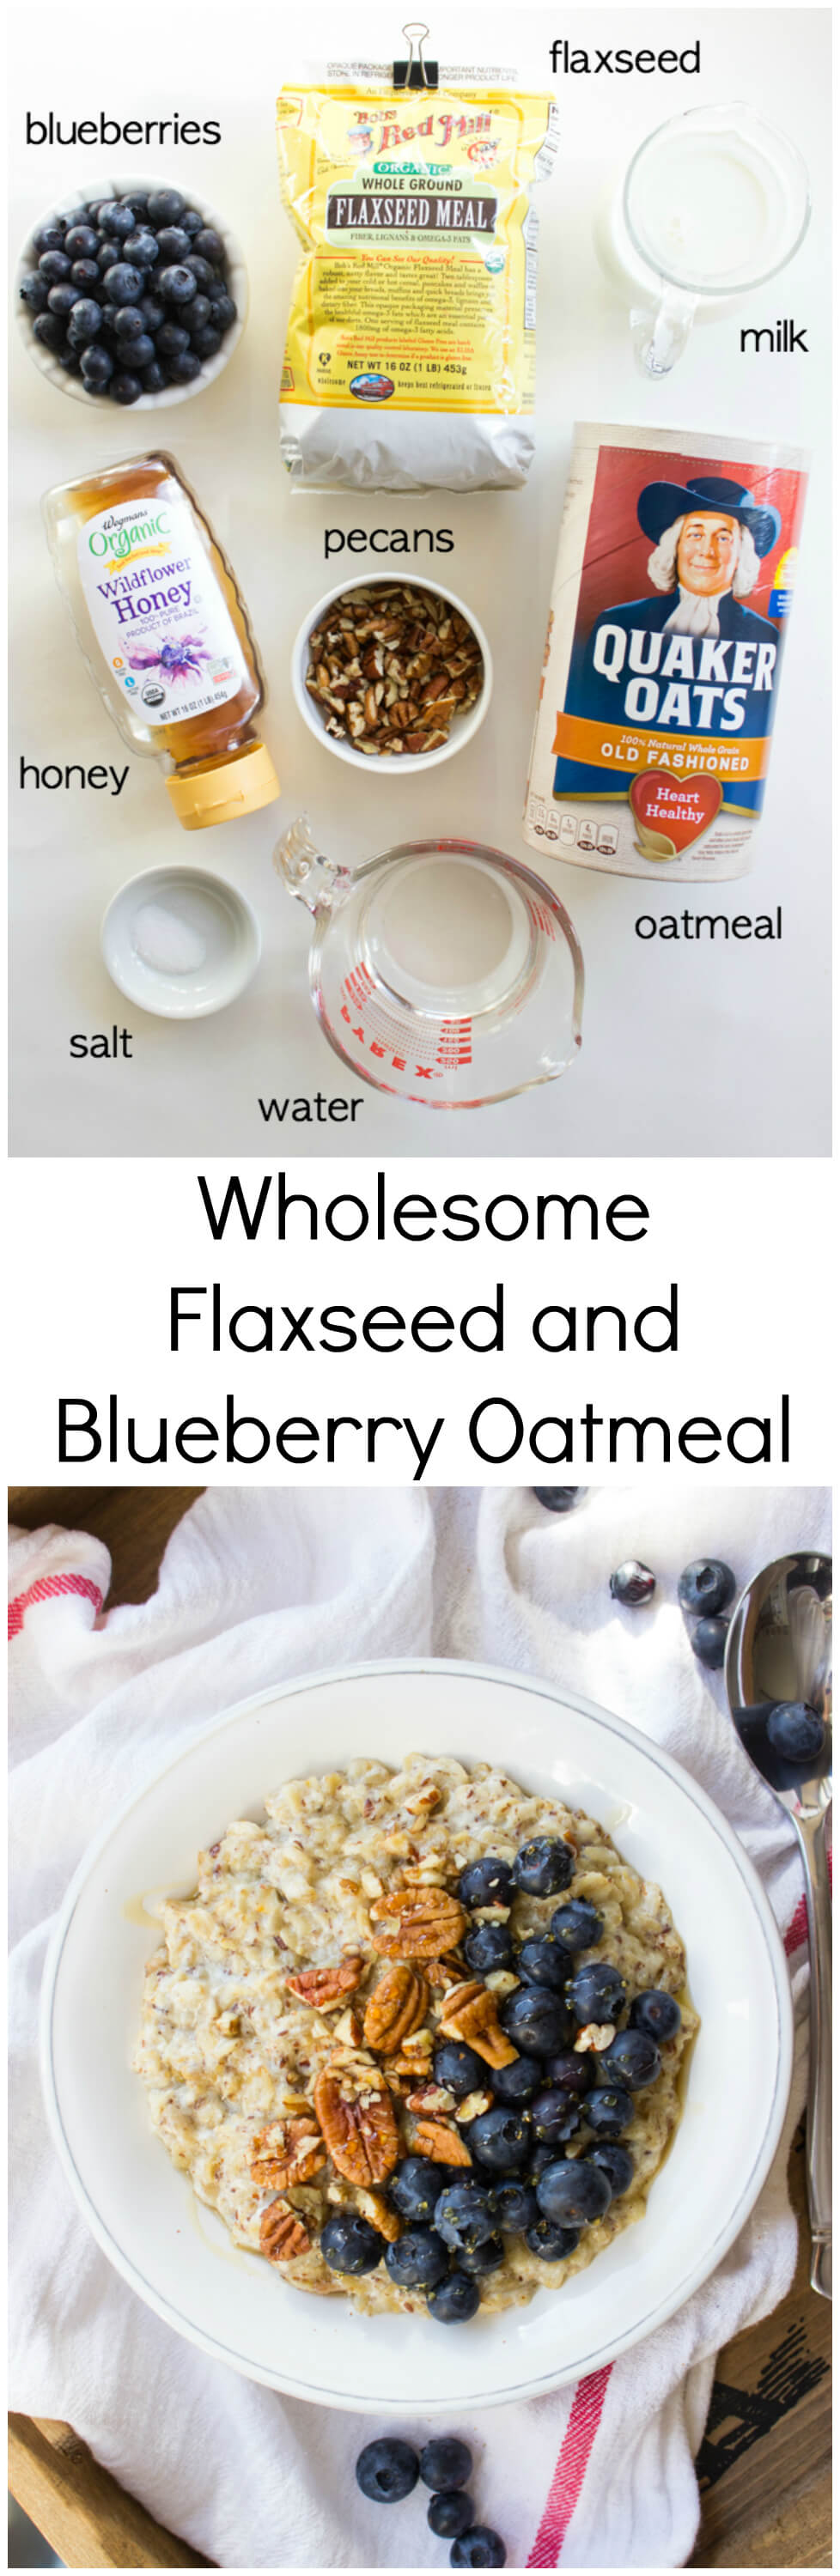 Wholesome Flaxseed and Blueberry Oatmeal - hearty bowl of oatmeal with flax, blueberries, pecans, and drizzle of honey. The best breakfast you'll ever have! | littlebroken.com @littlebroken